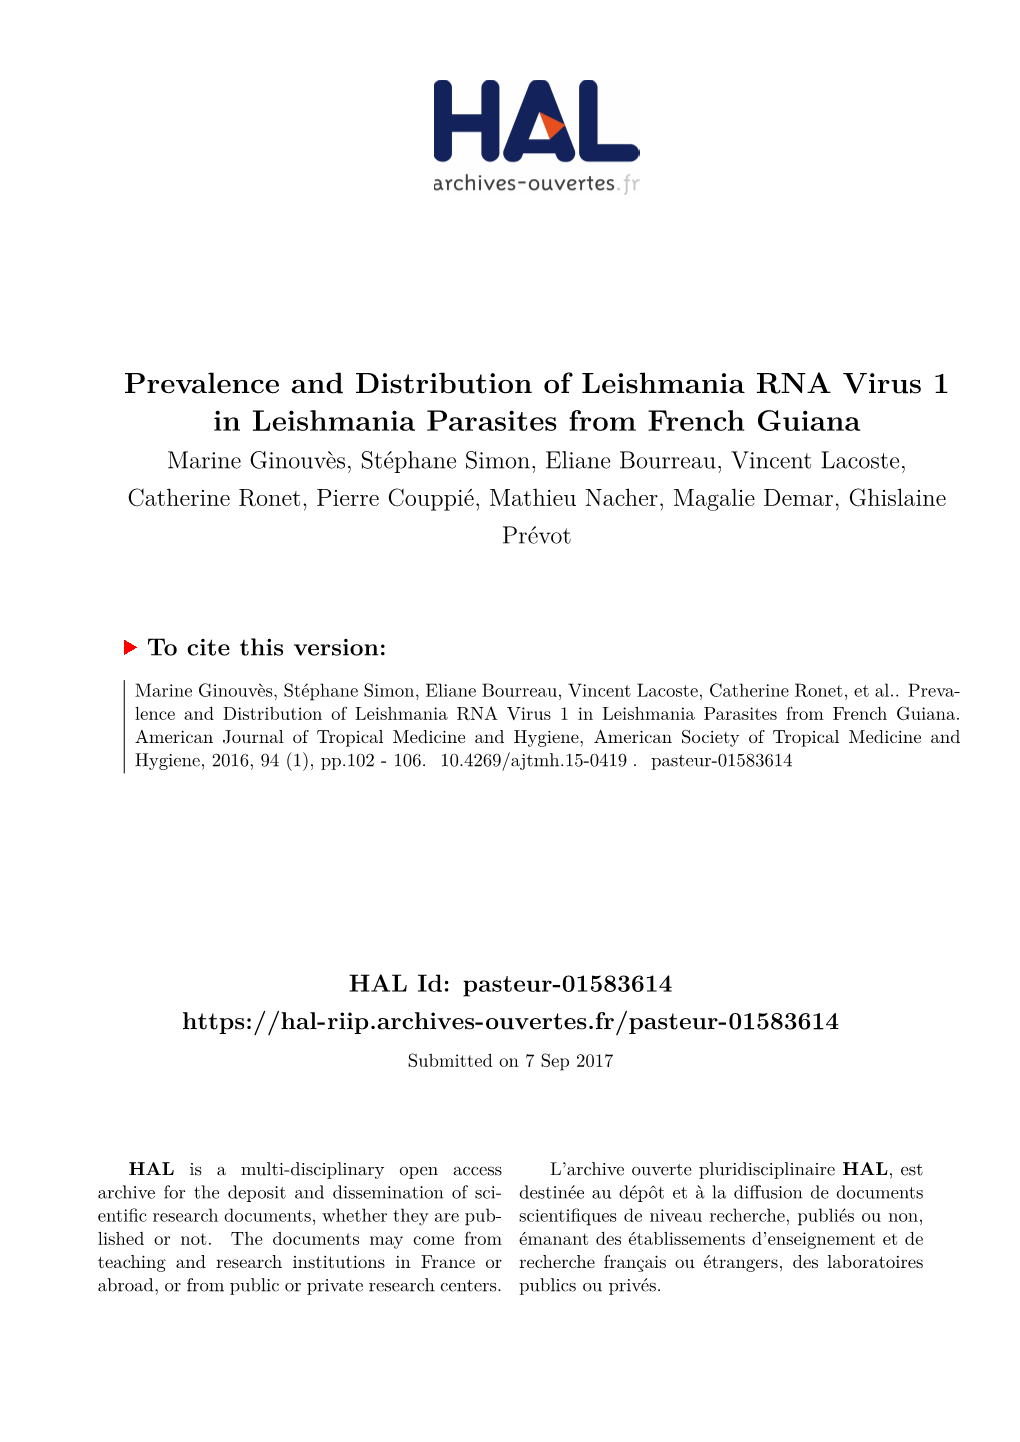 Prevalence and Distribution of Leishmania RNA Virus 1 In